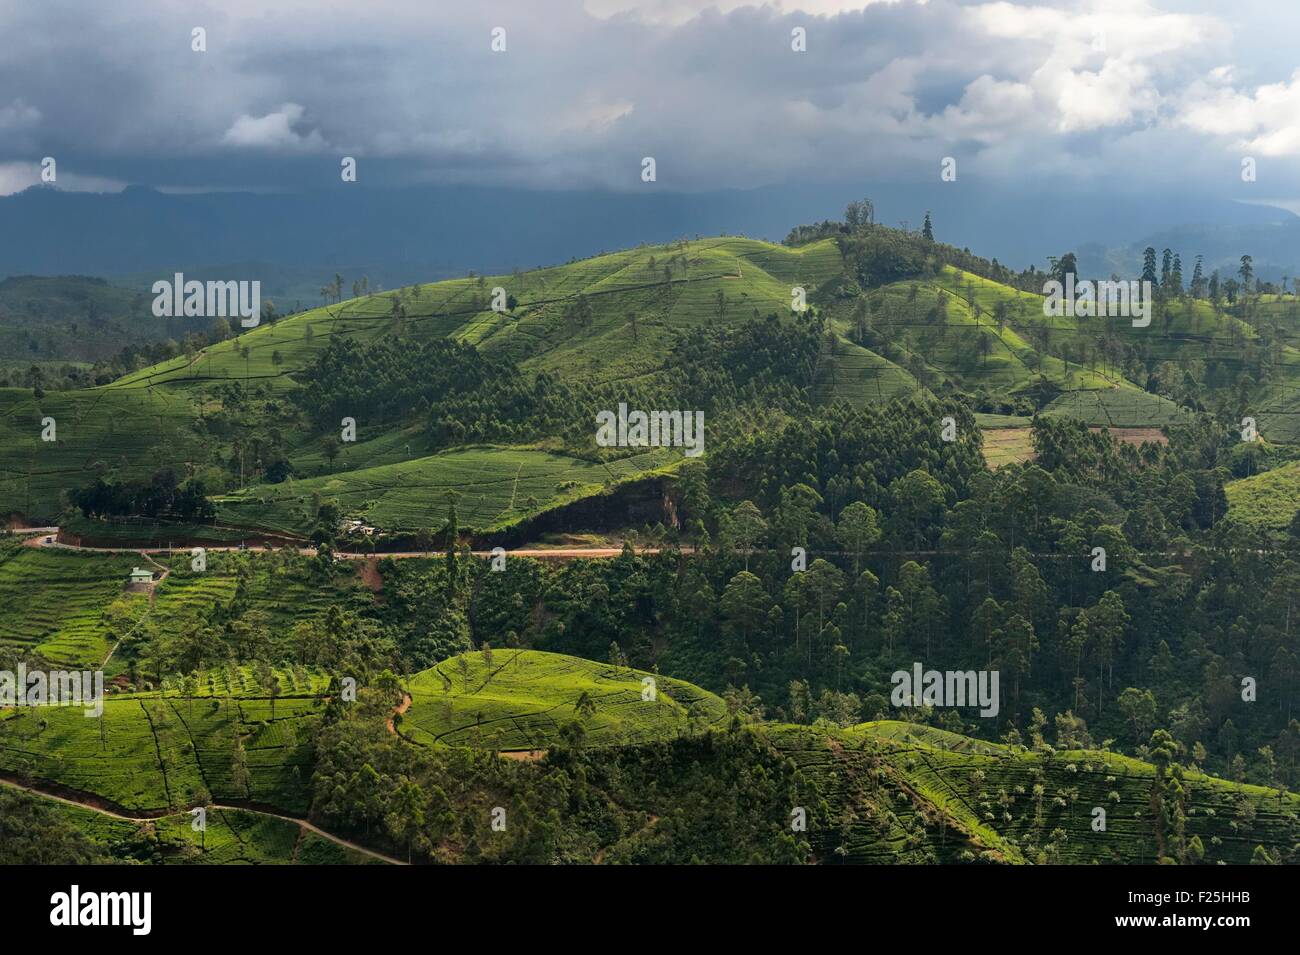 Sri Lanka, Central Province, the popular scenic train ride through the tea growing hill country between Hatton and Badulla, here between Great Western and Raddalla, tea plantation Stock Photo